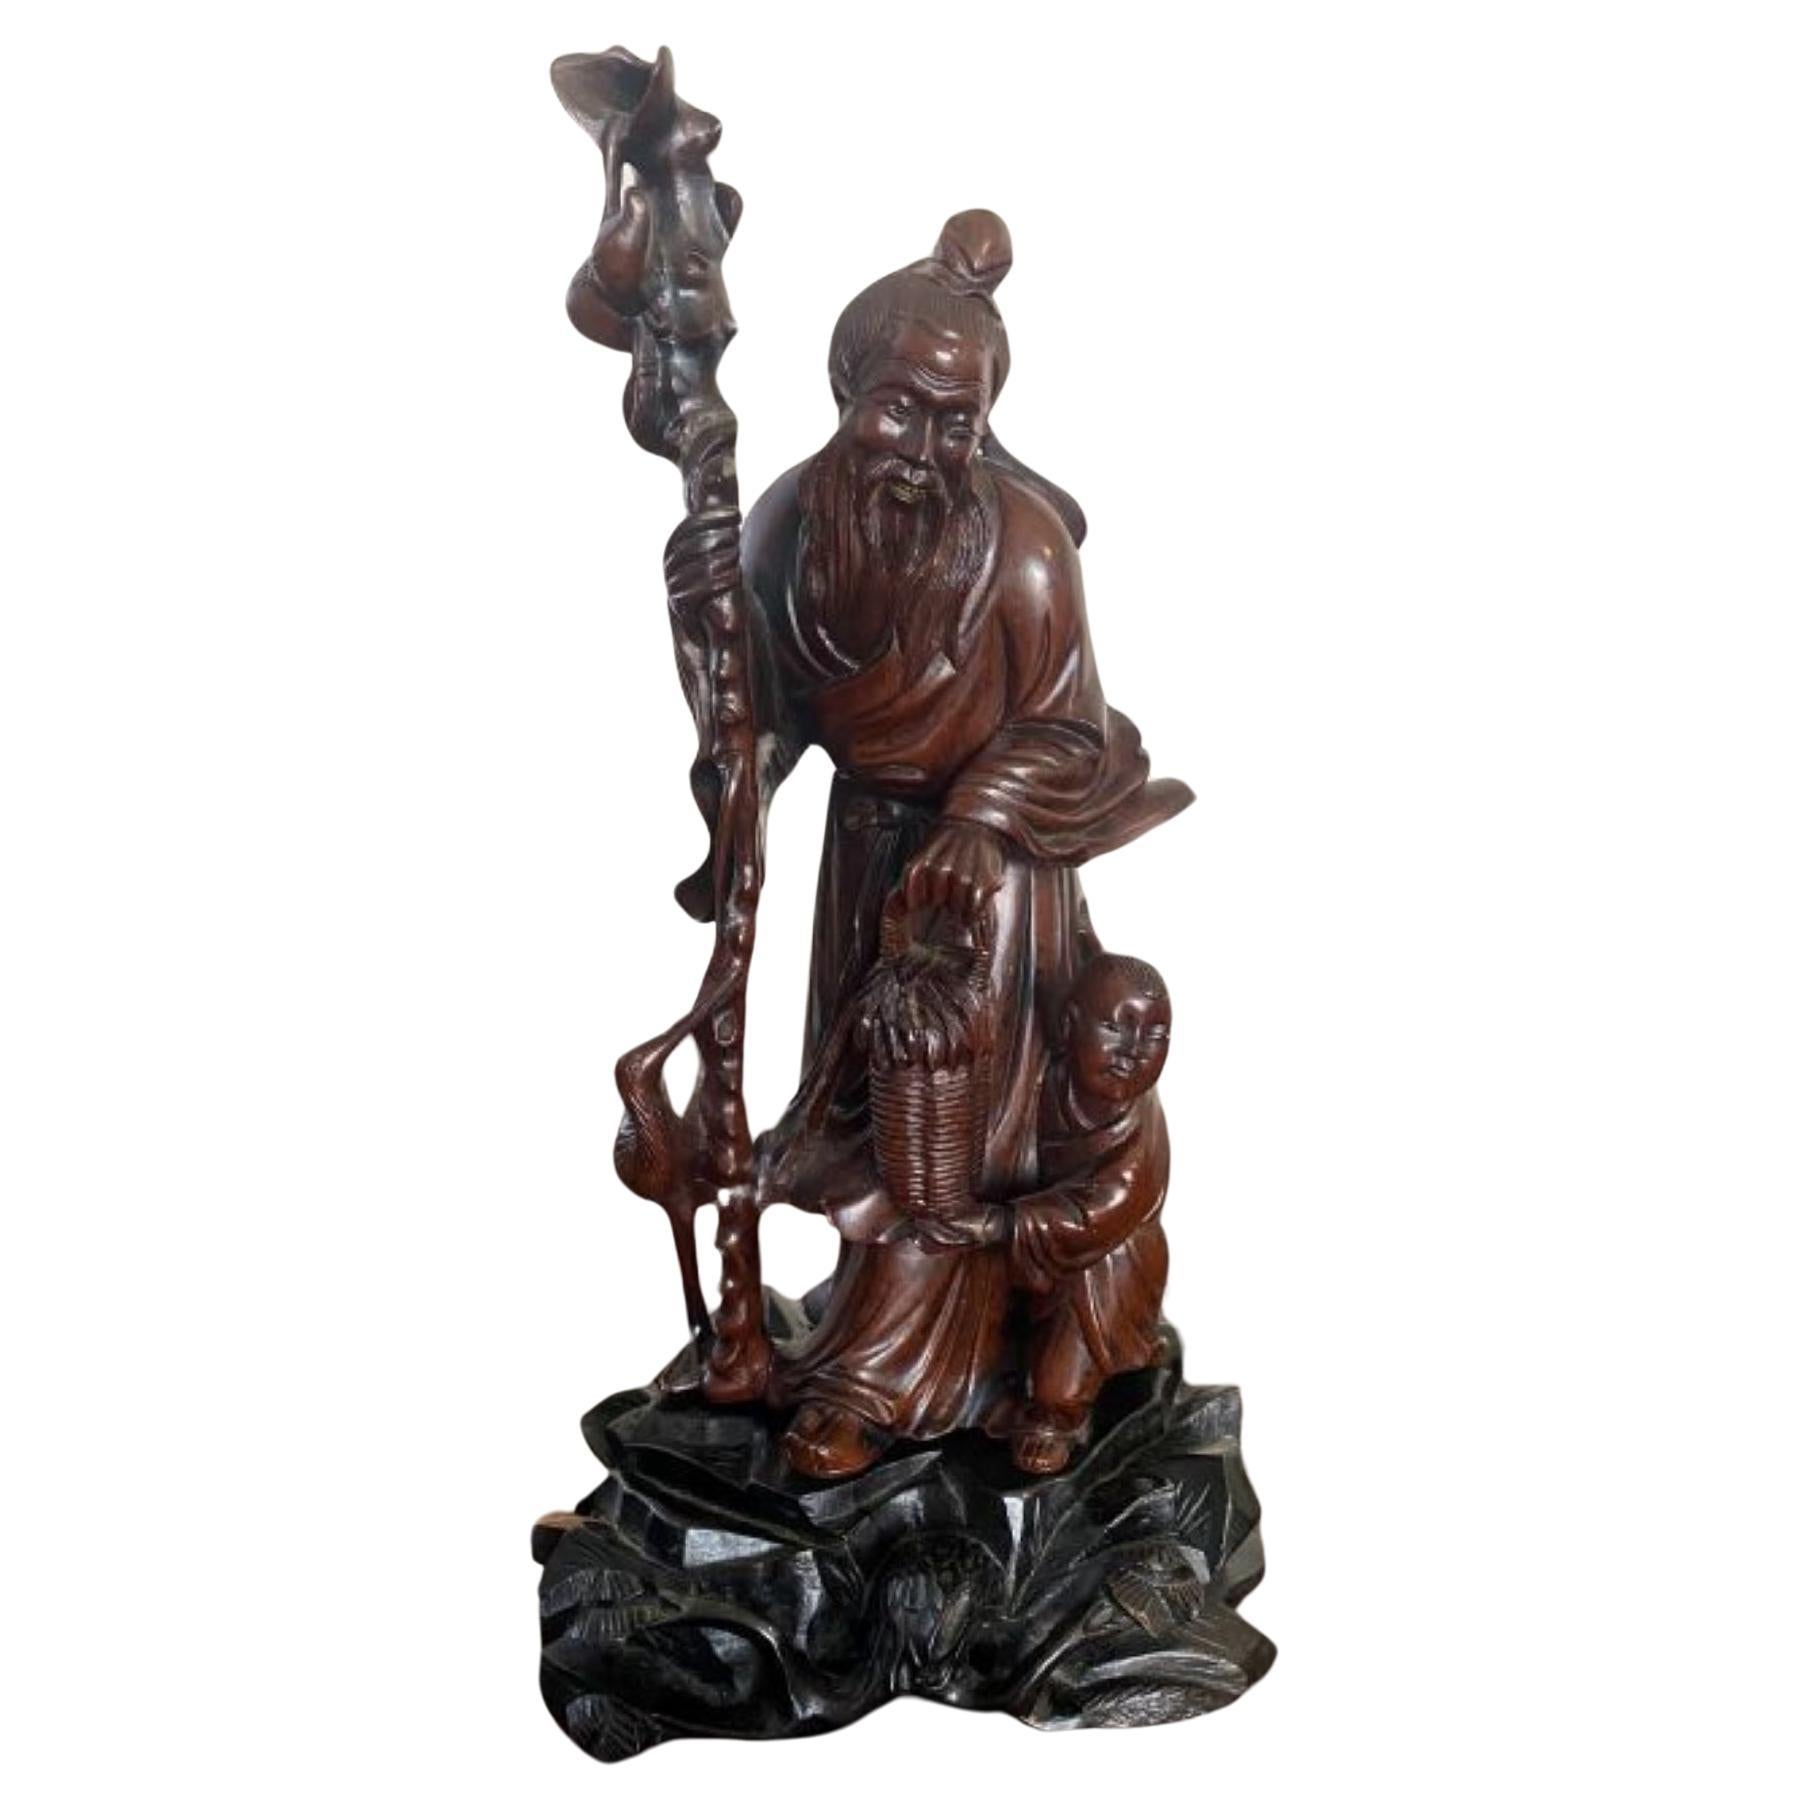 Quality antique Chinese carved hardwood figure For Sale